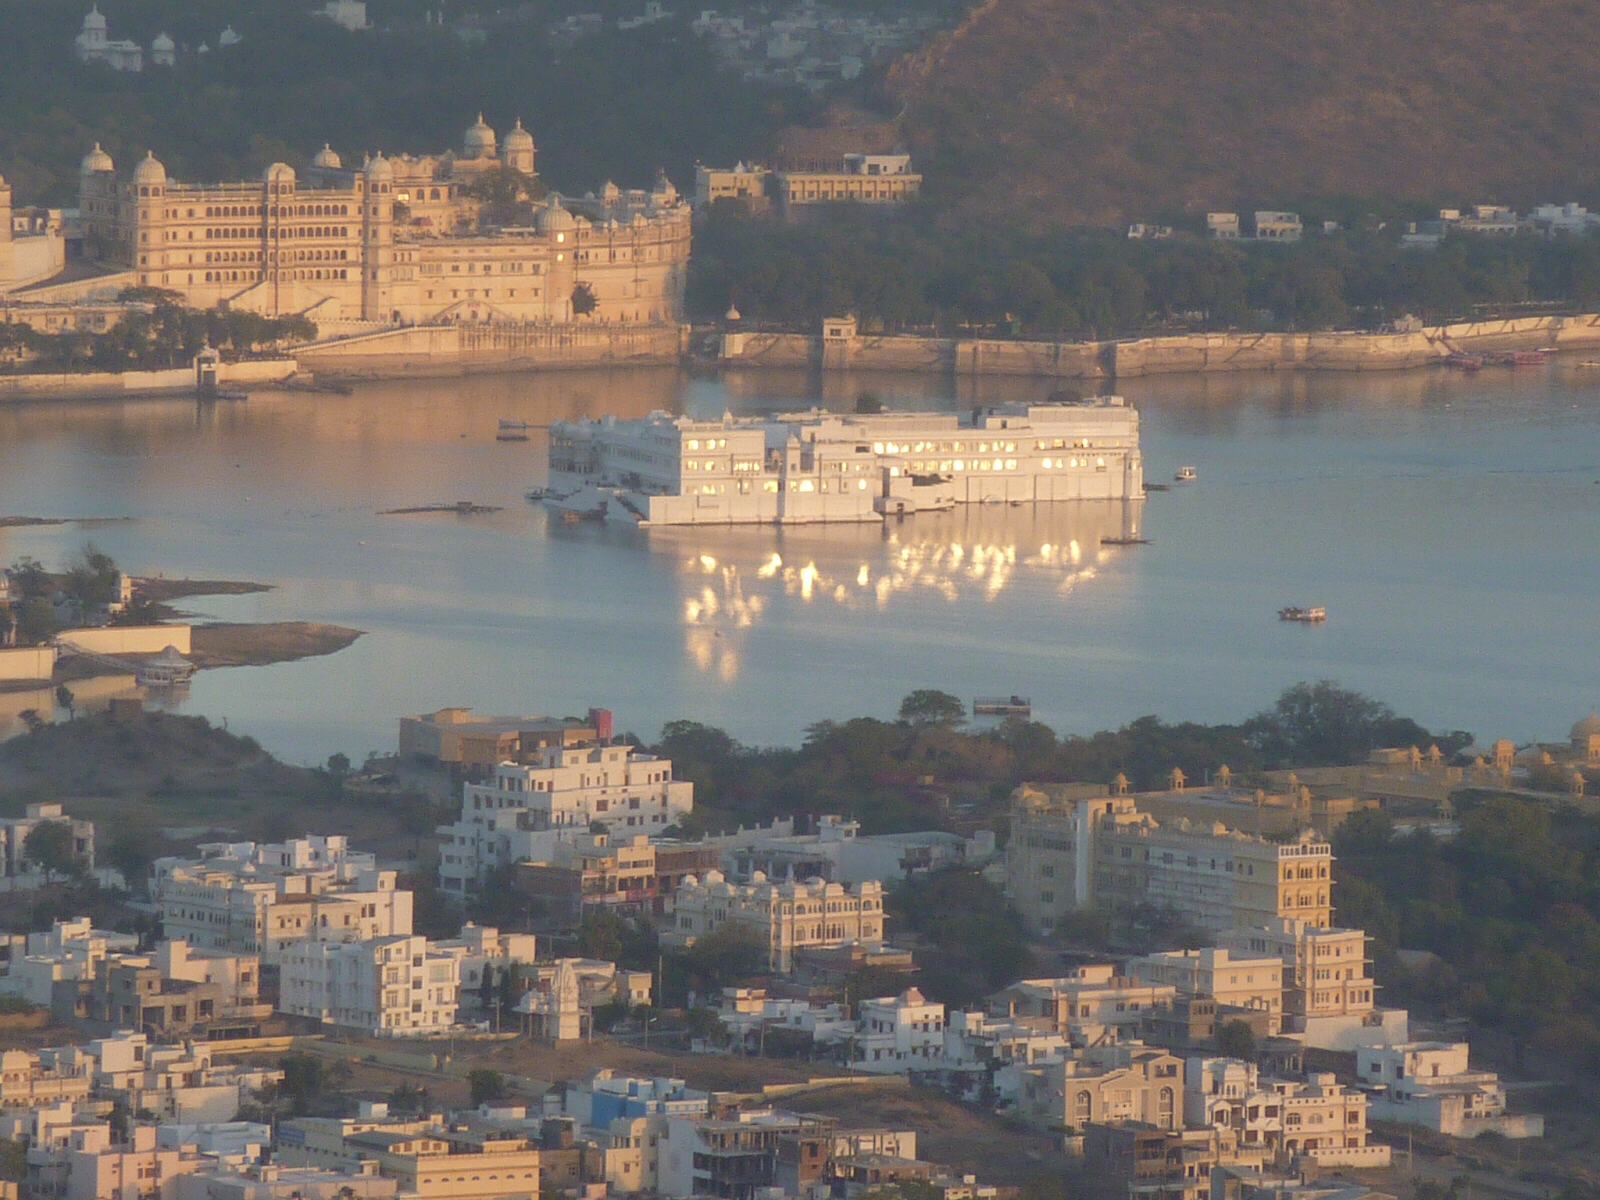 Sunset on the lake from the Monsoon Palace, Udaipur, Rajasthan